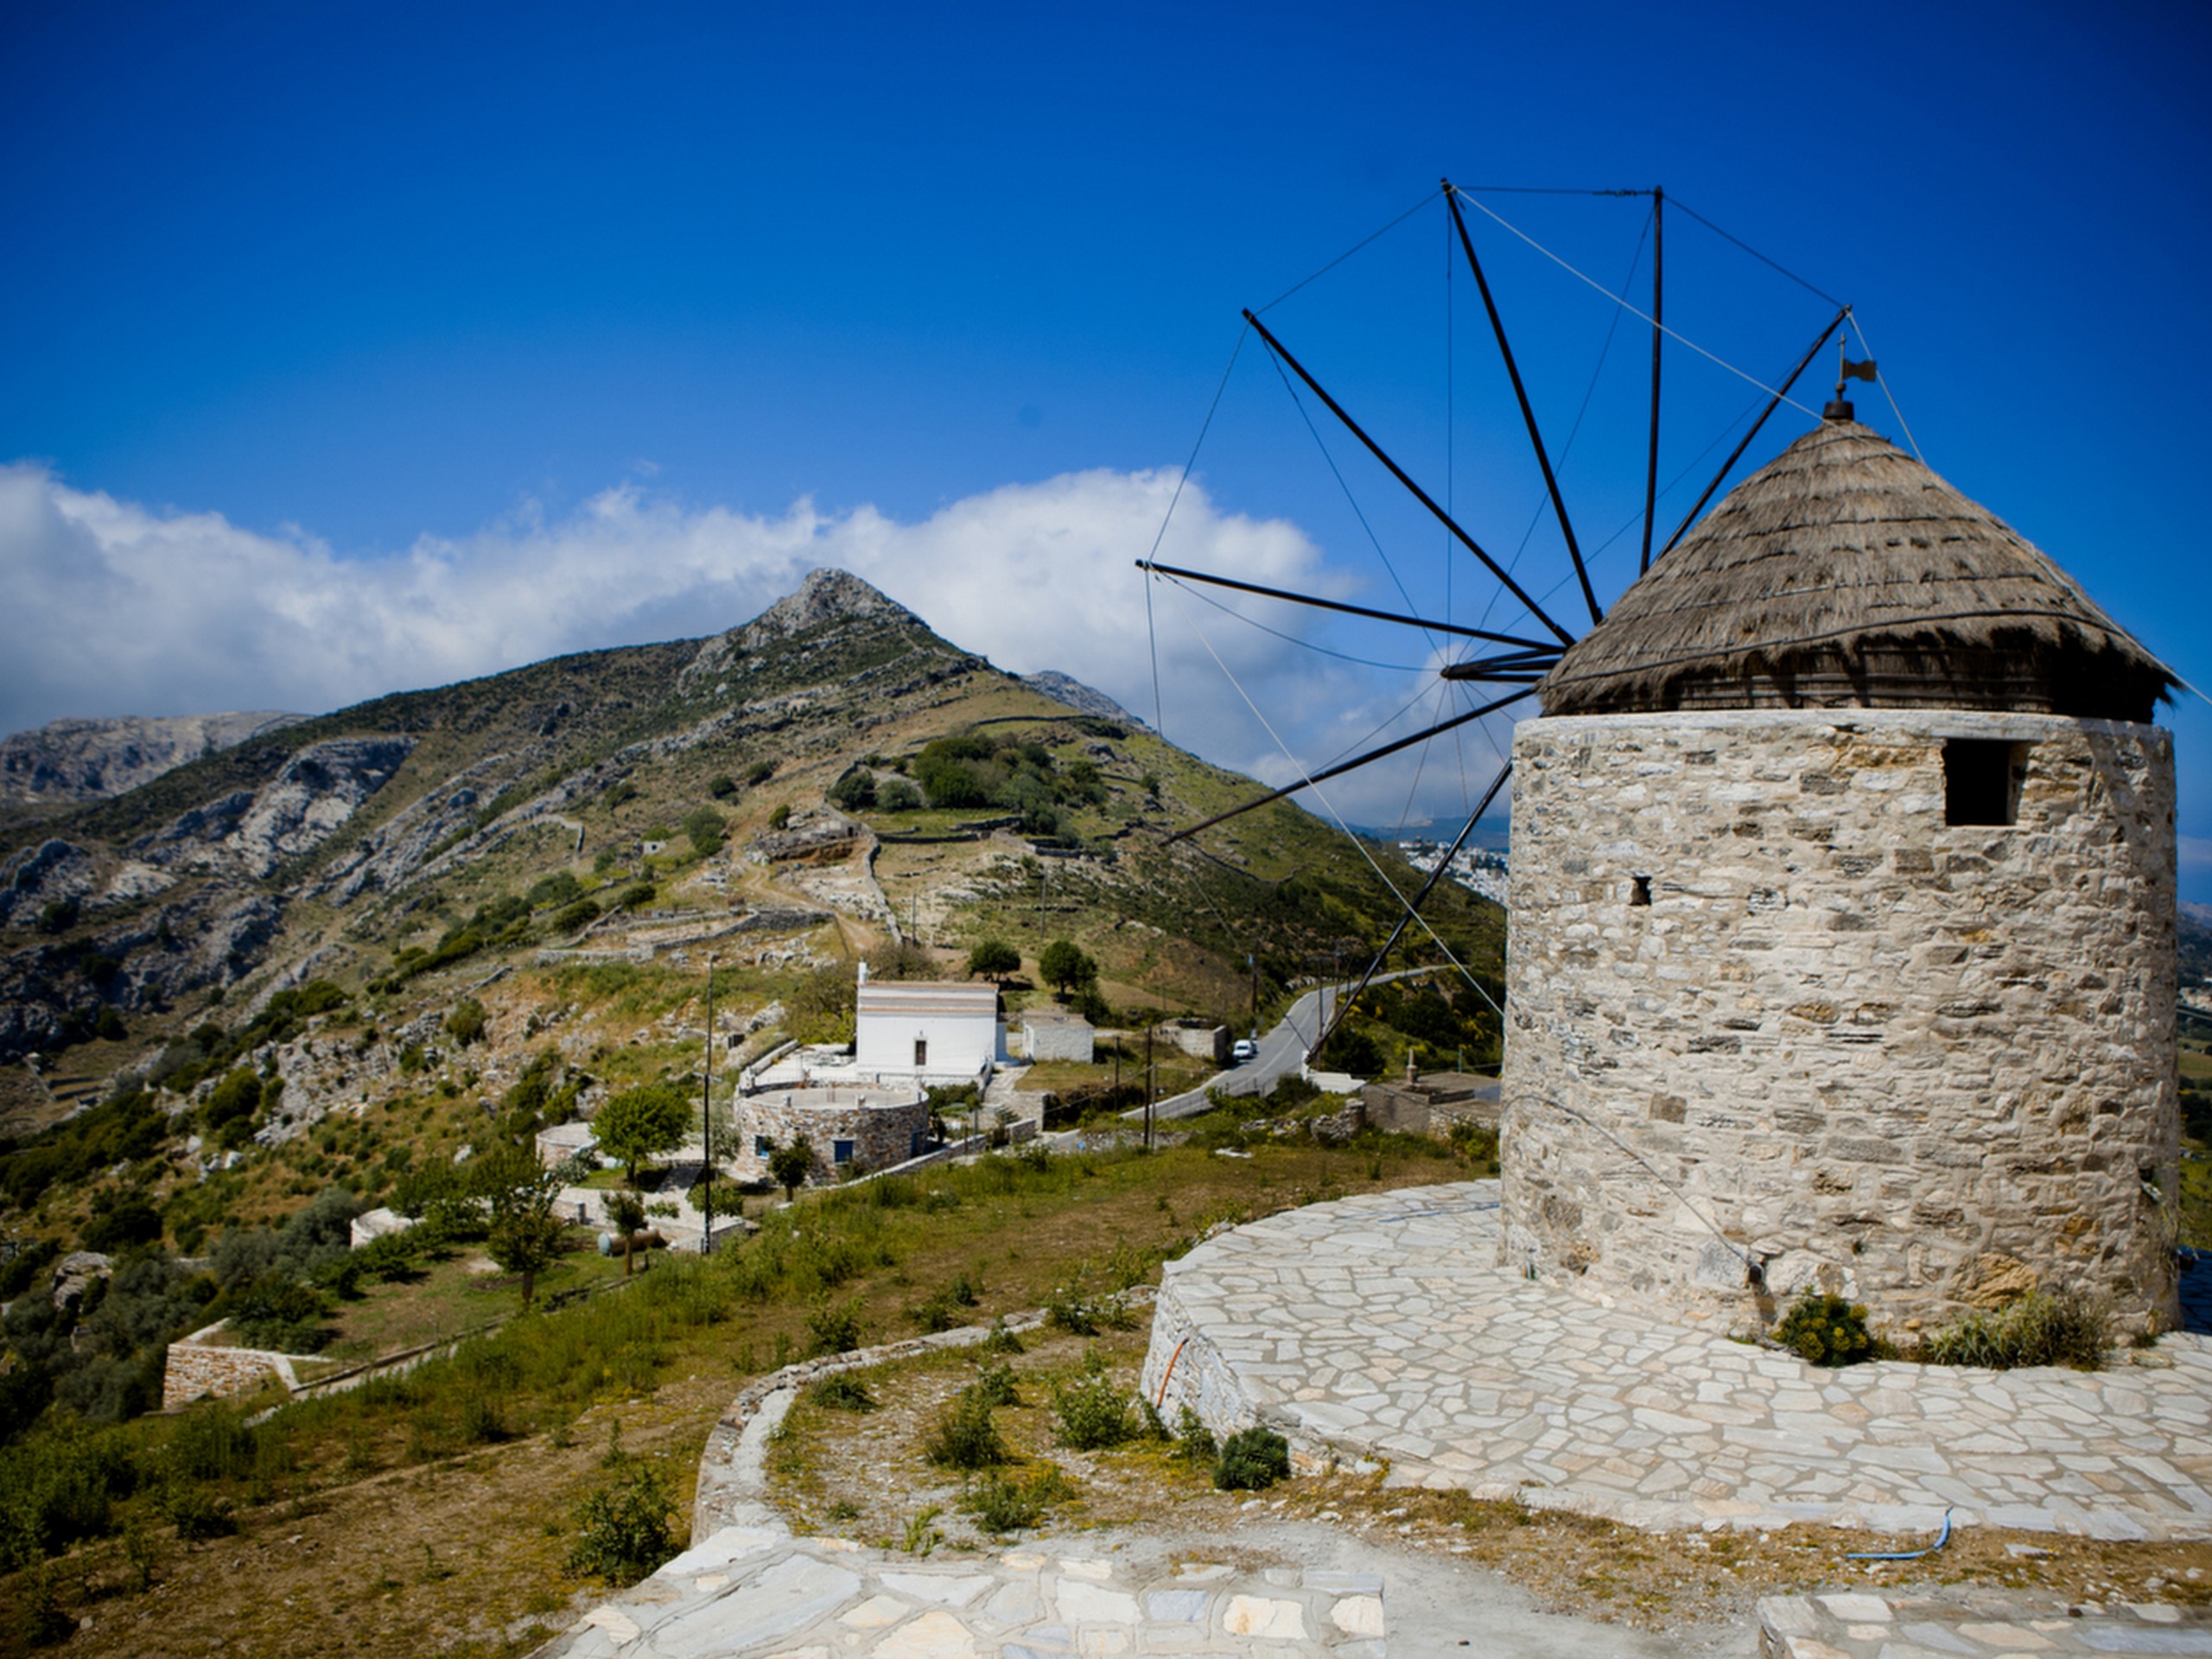 Old windmill in one of the Cyclades Islands in Greece